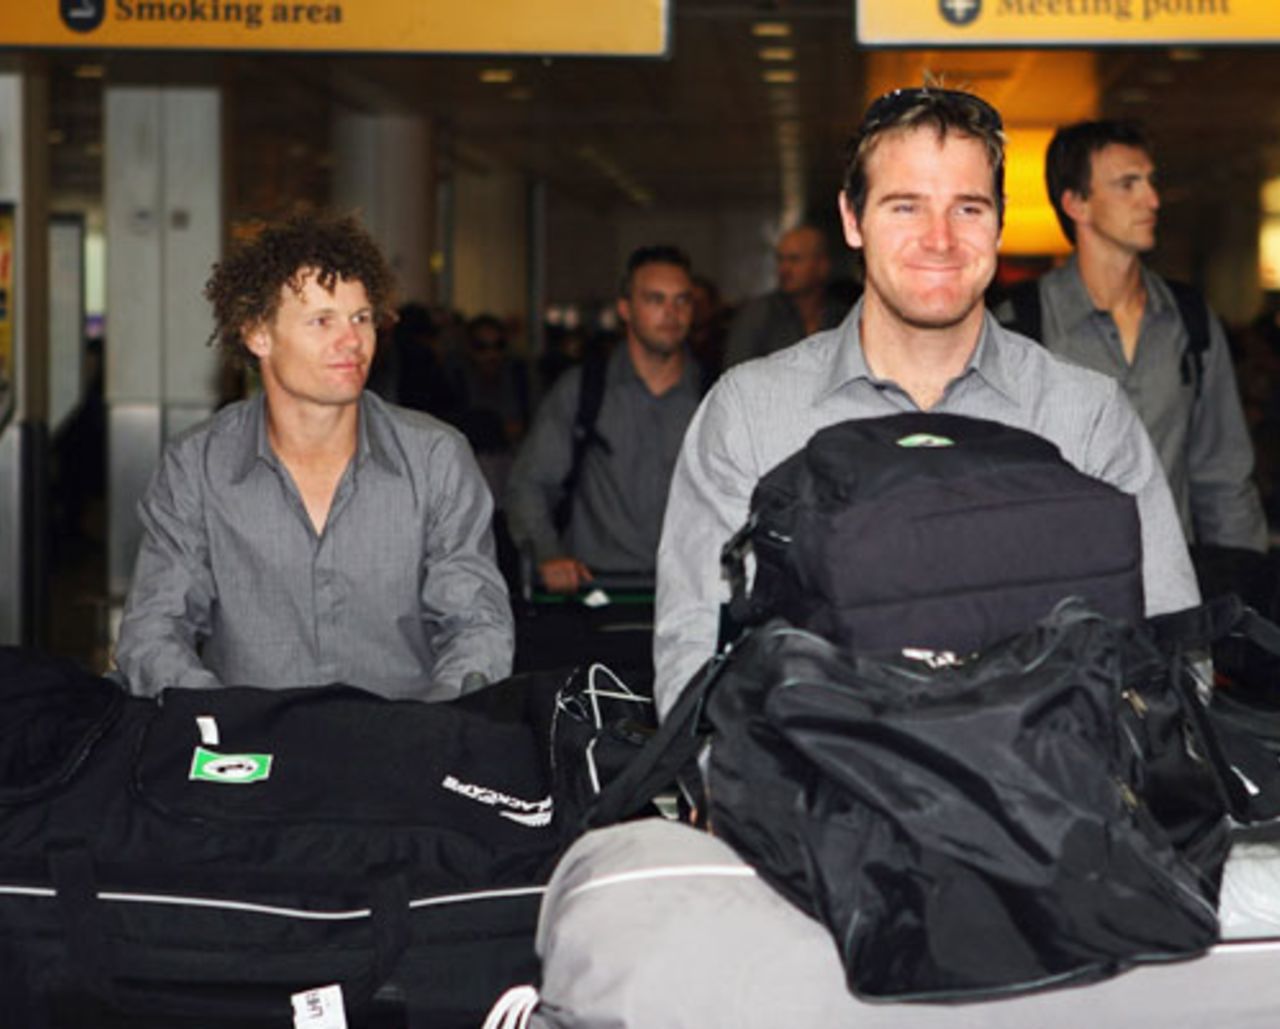 Jamie How and James Marshall arrive at Heathrow airport, London, April 23, 2008